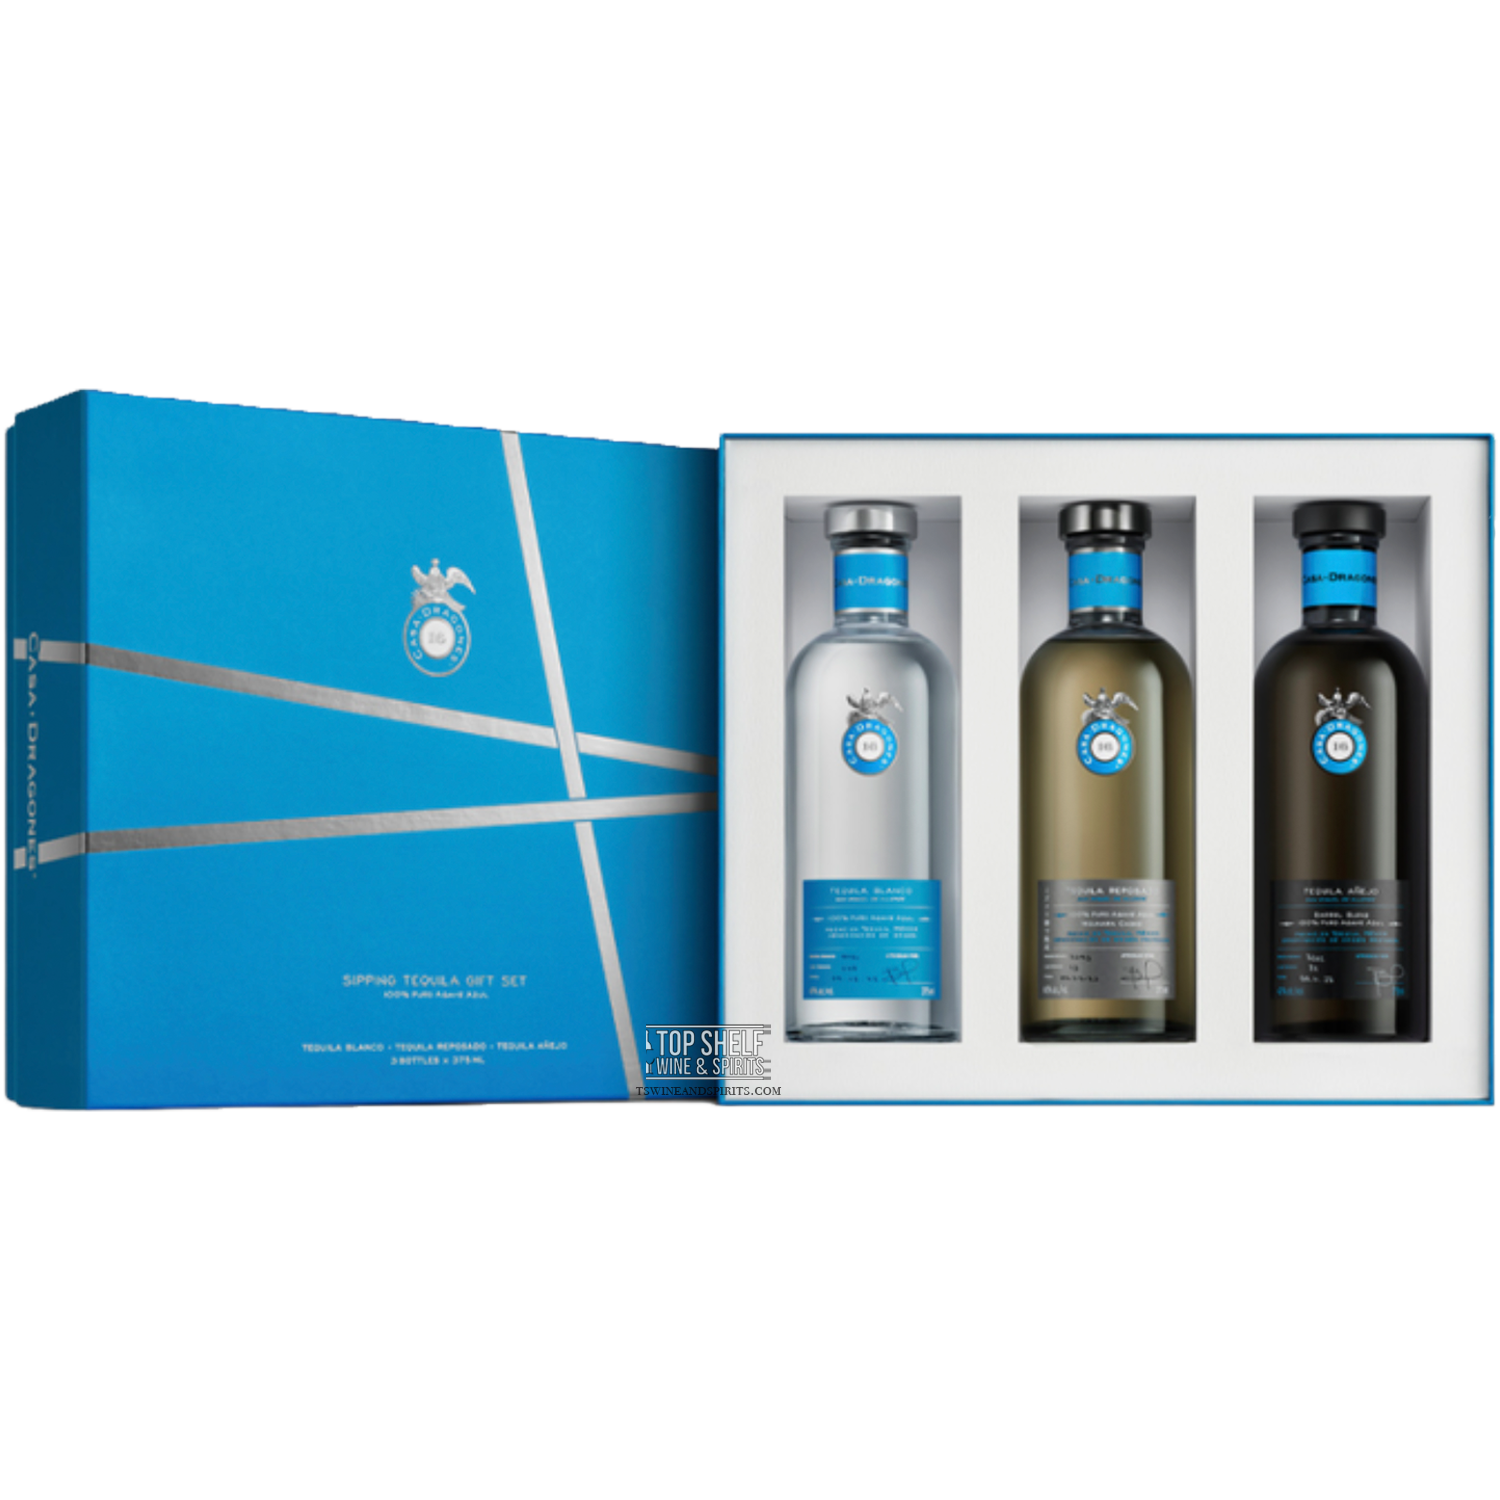 Casa Dragones Sipping Tequila Gift Set (3 Pack)